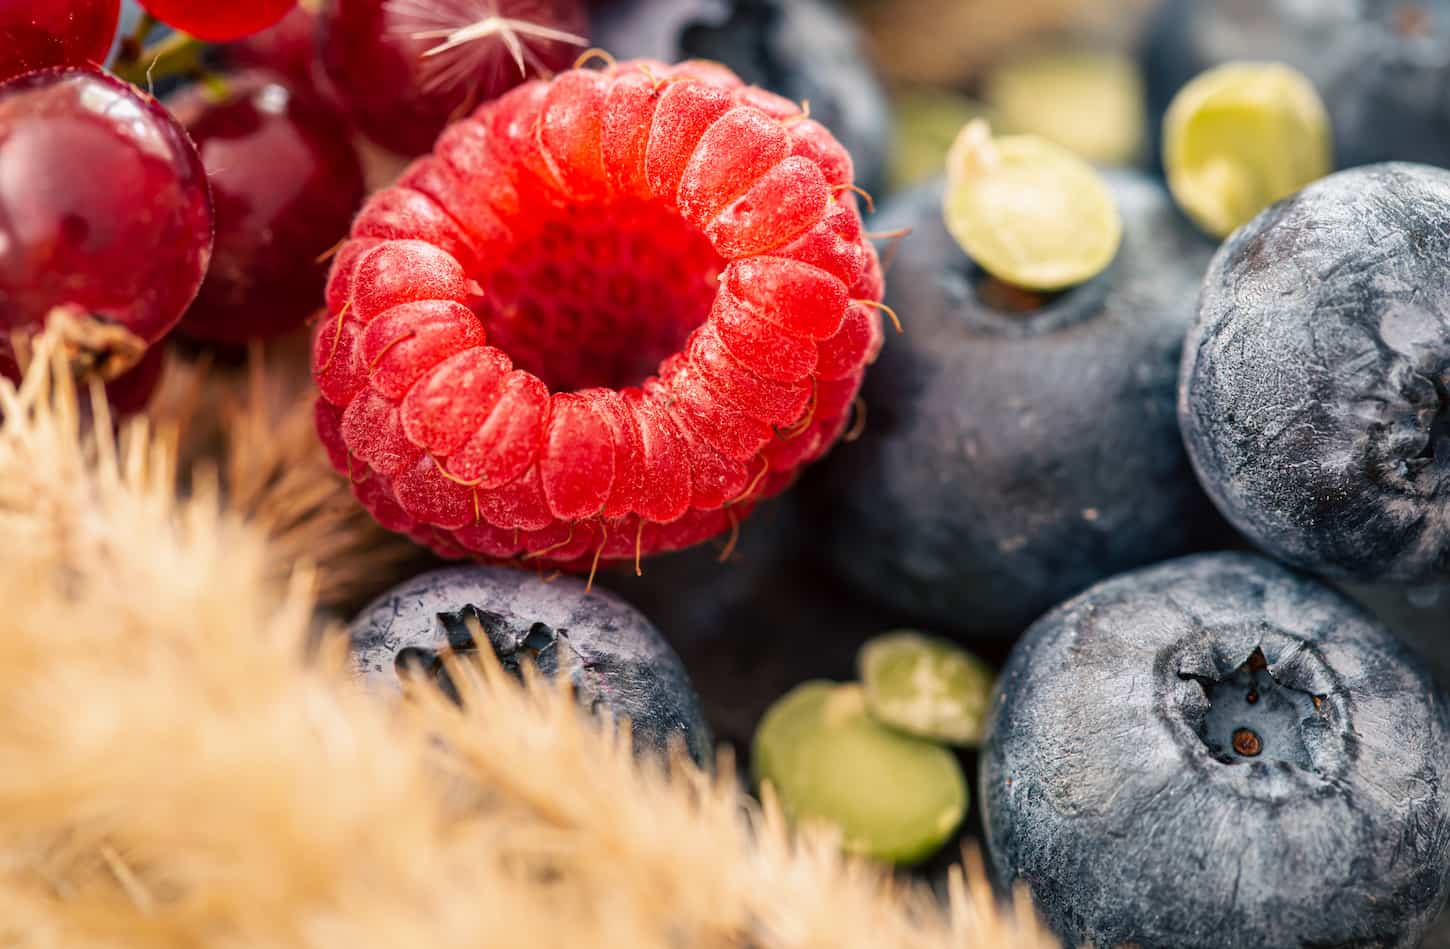 Can Berries Be Left Out at Room Temperature?